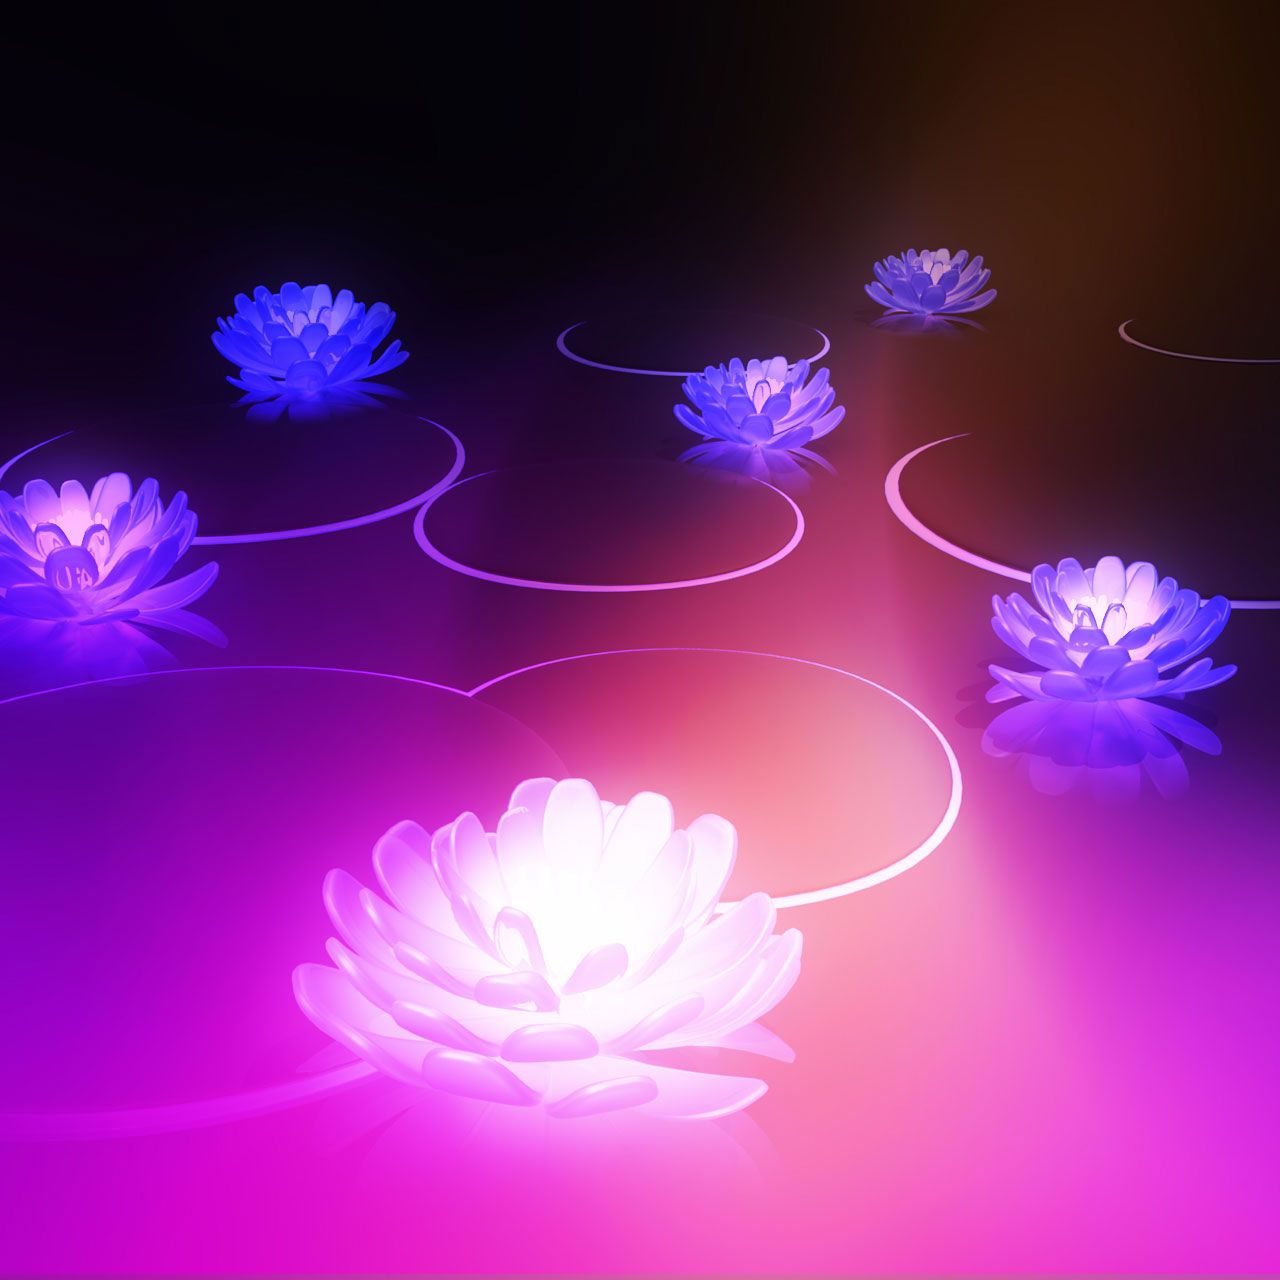 Lotus Tablet wallpaper and background. Flowers wallpaper. T Mobile G Slate 4g Tablet wallpaper